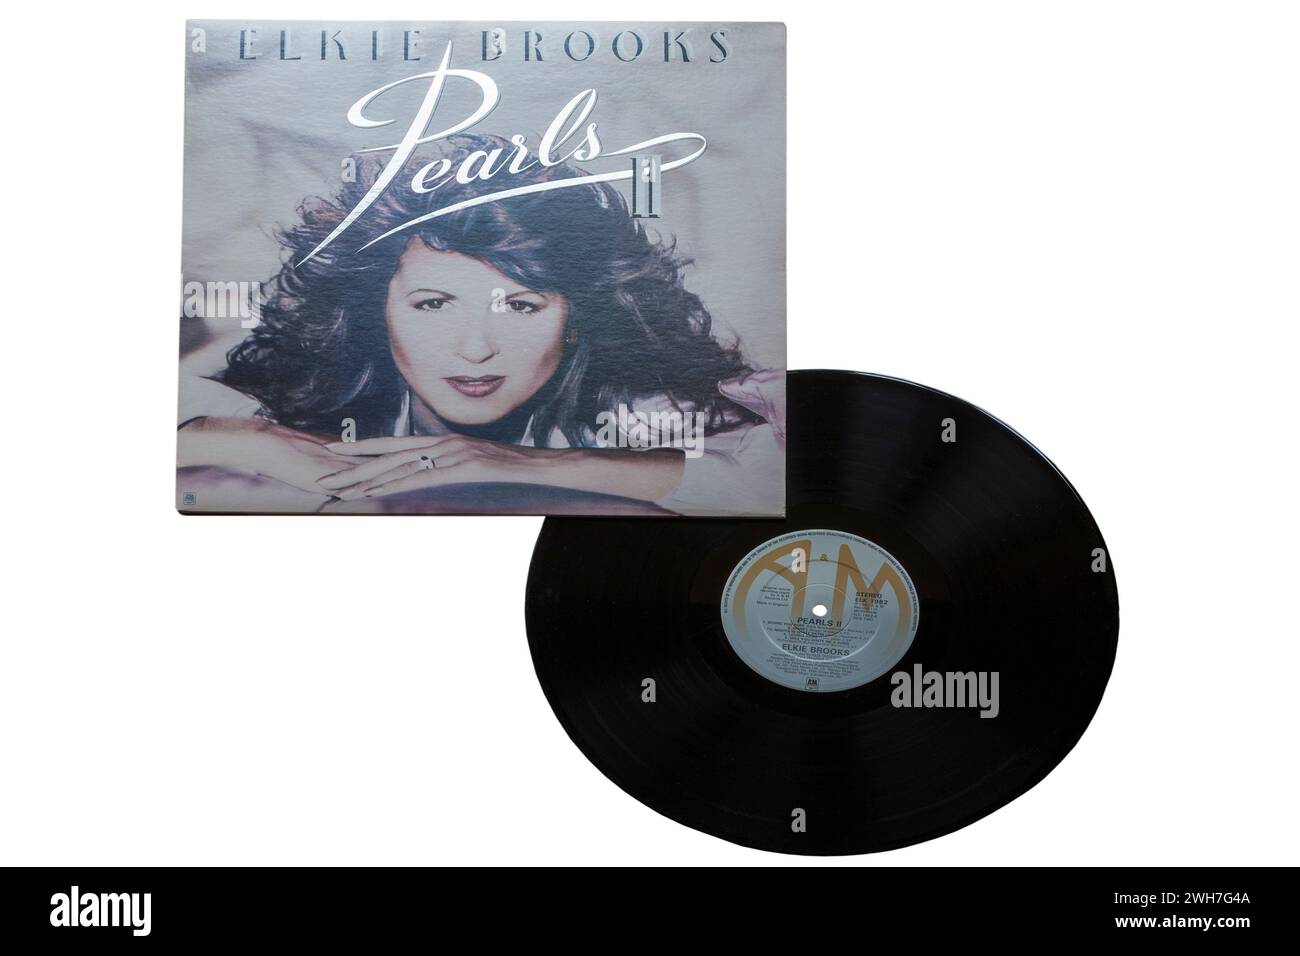 Elkie Brooks Pearls II vinyl record album LP cover isolated on white background - 1982 Stock Photo